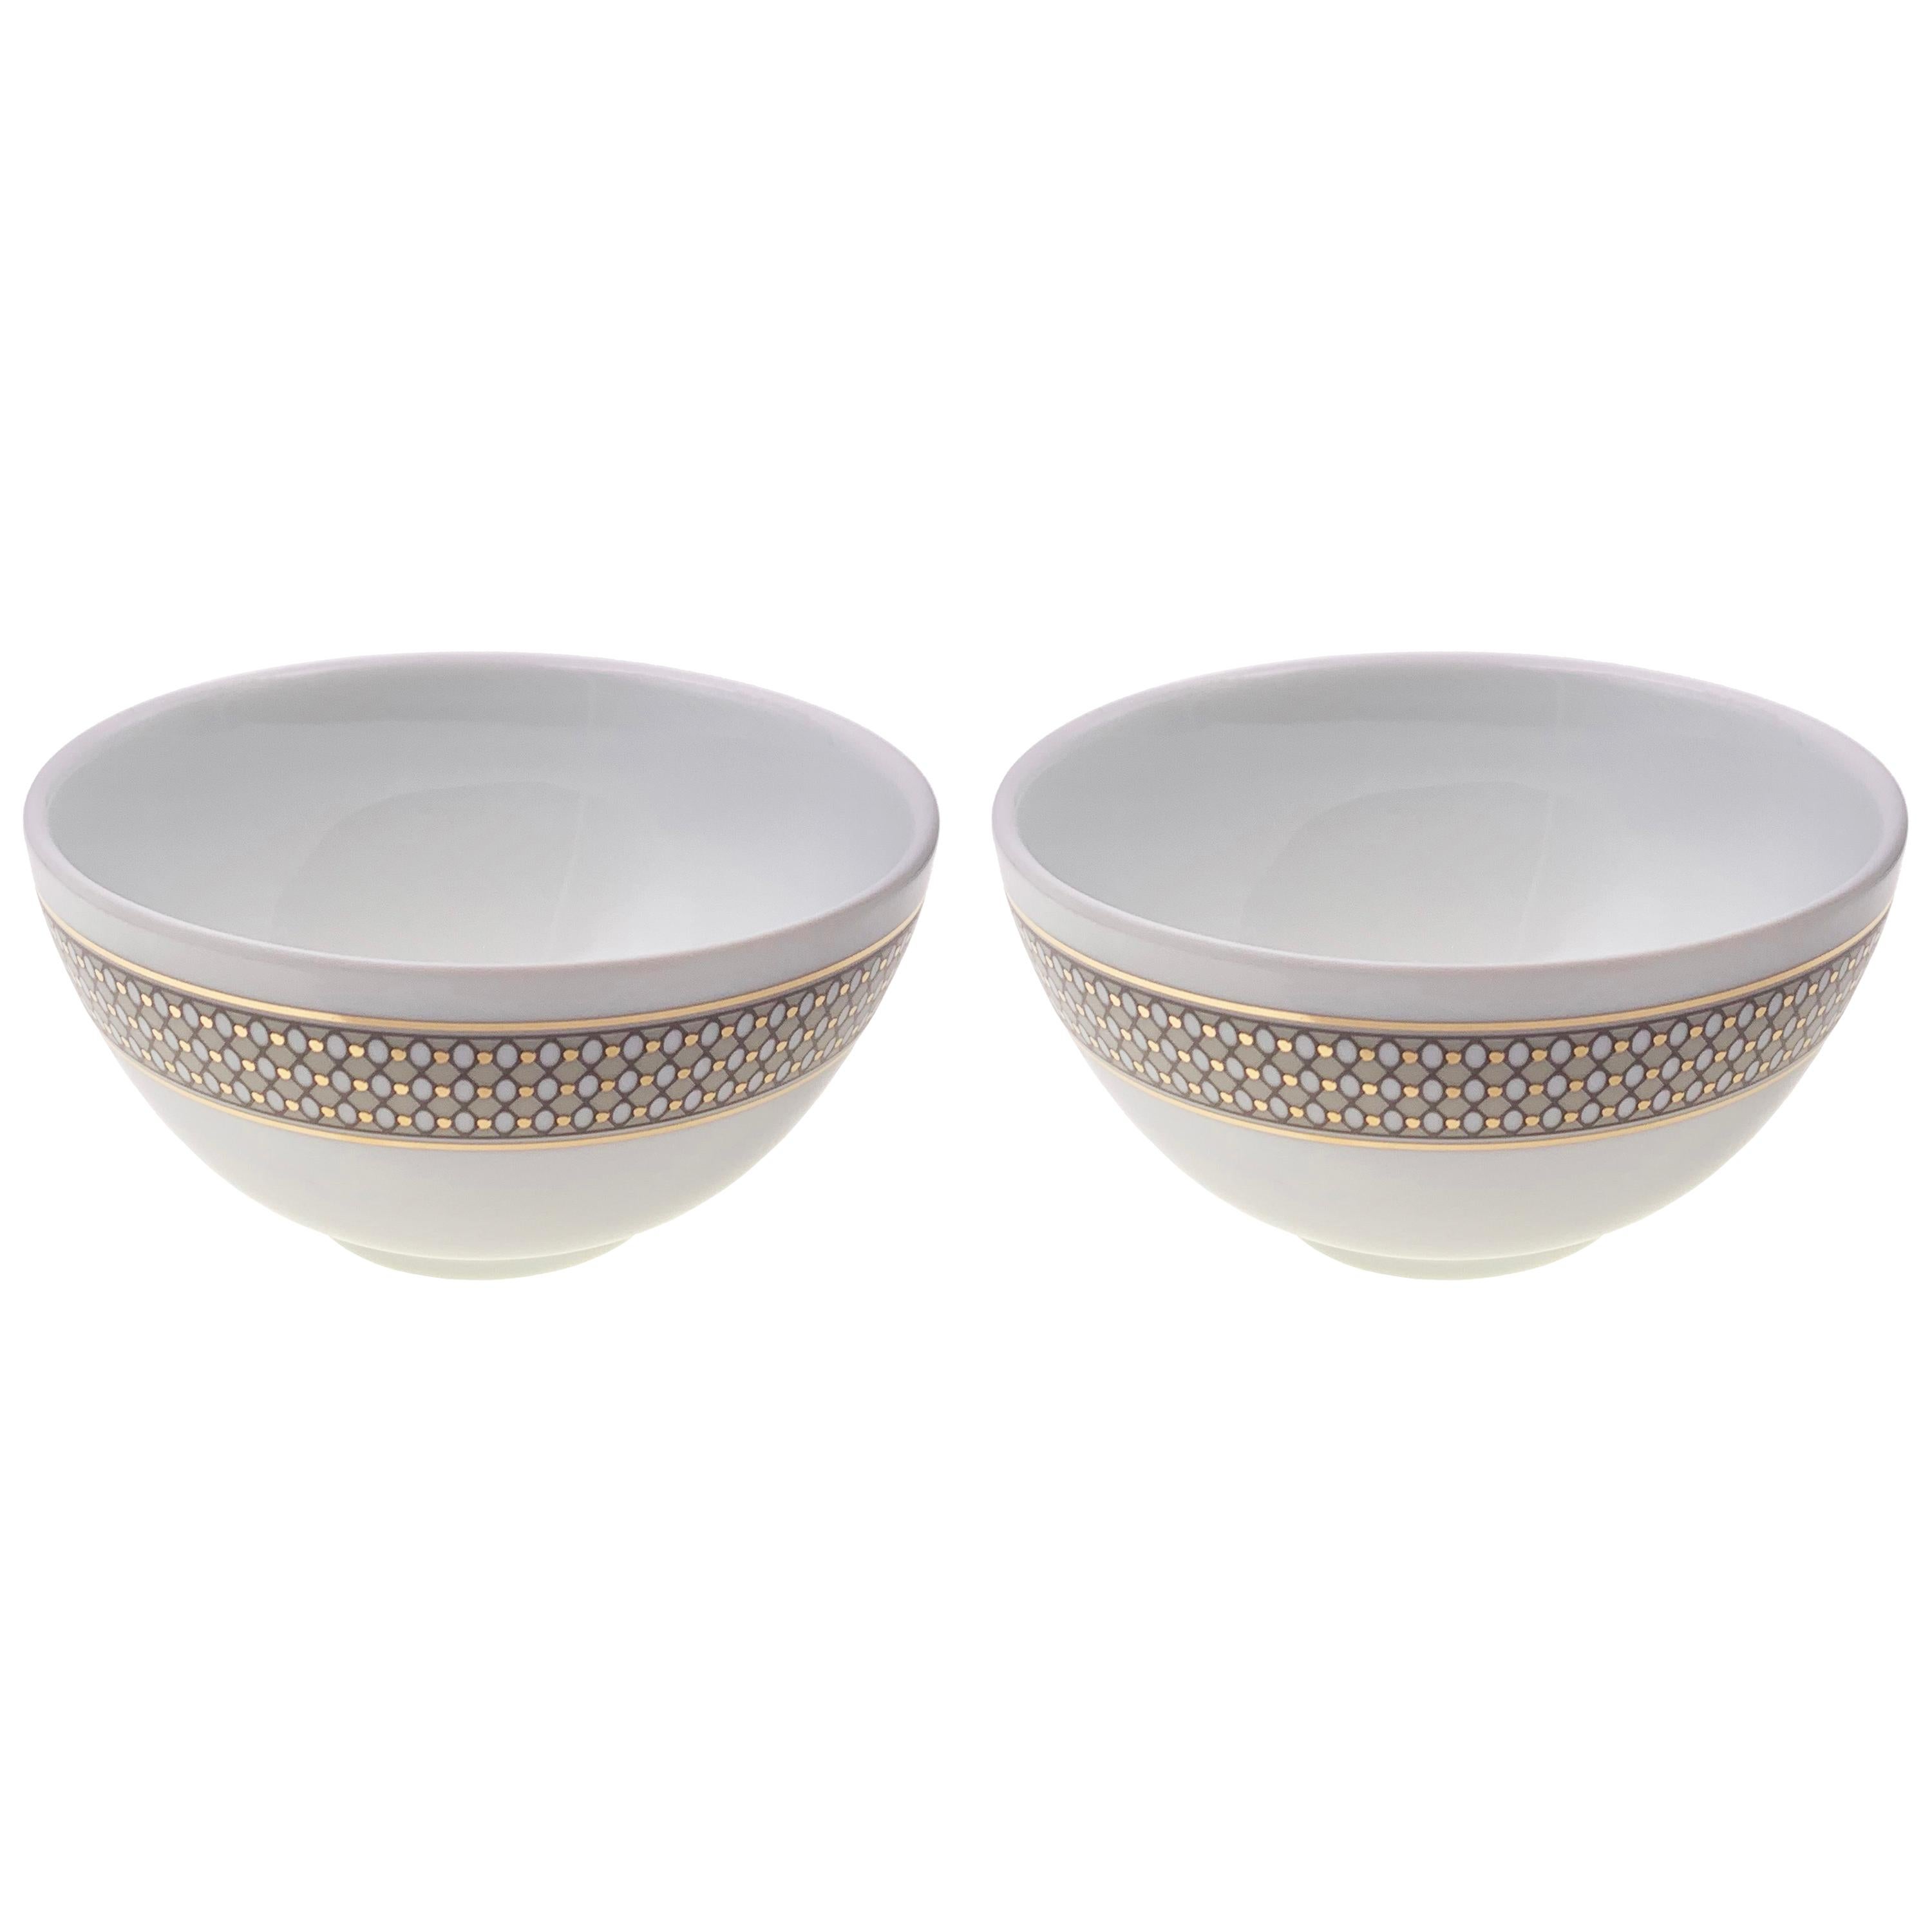 Set of 2 Chinese Soup Bowl Modern Vintage André Fu Living Tableware New